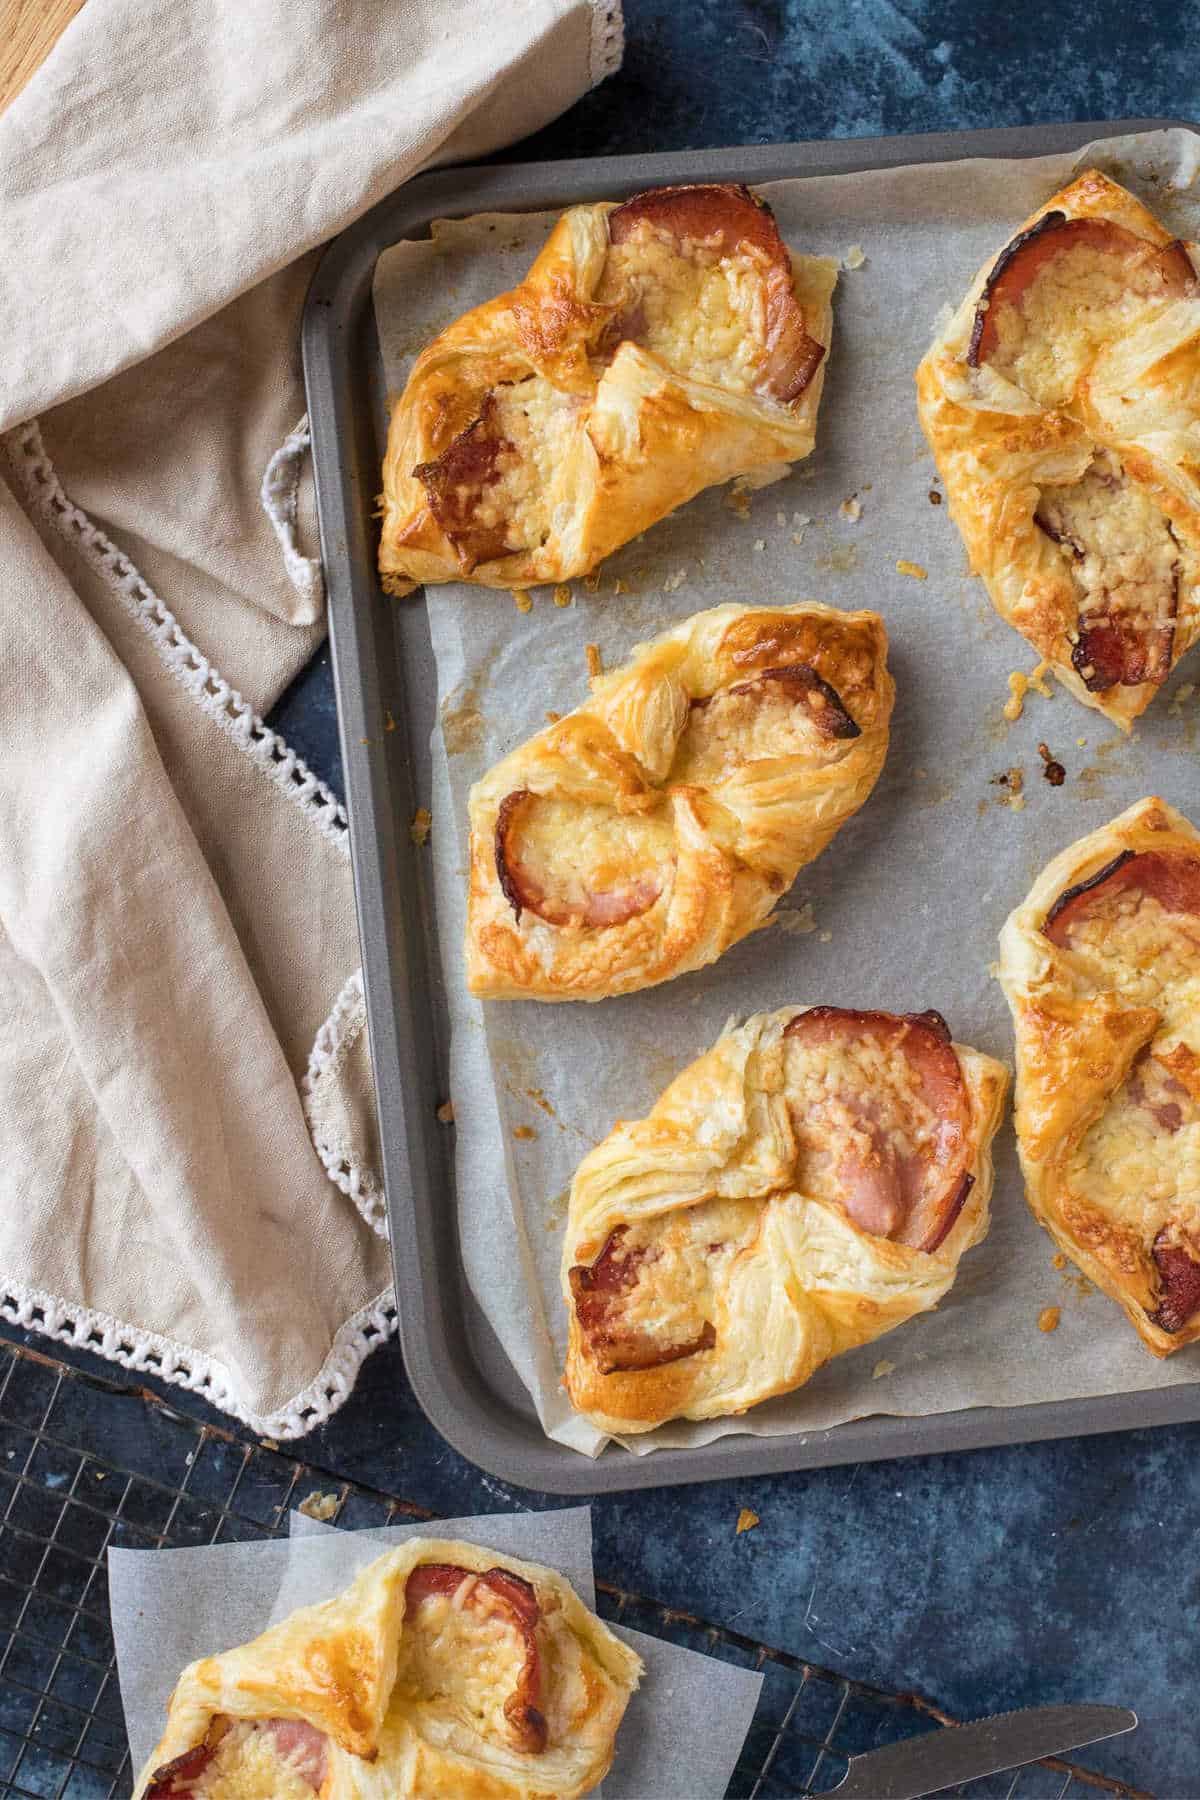 Cheese and bacon puff pastry wraps on a baking tray.